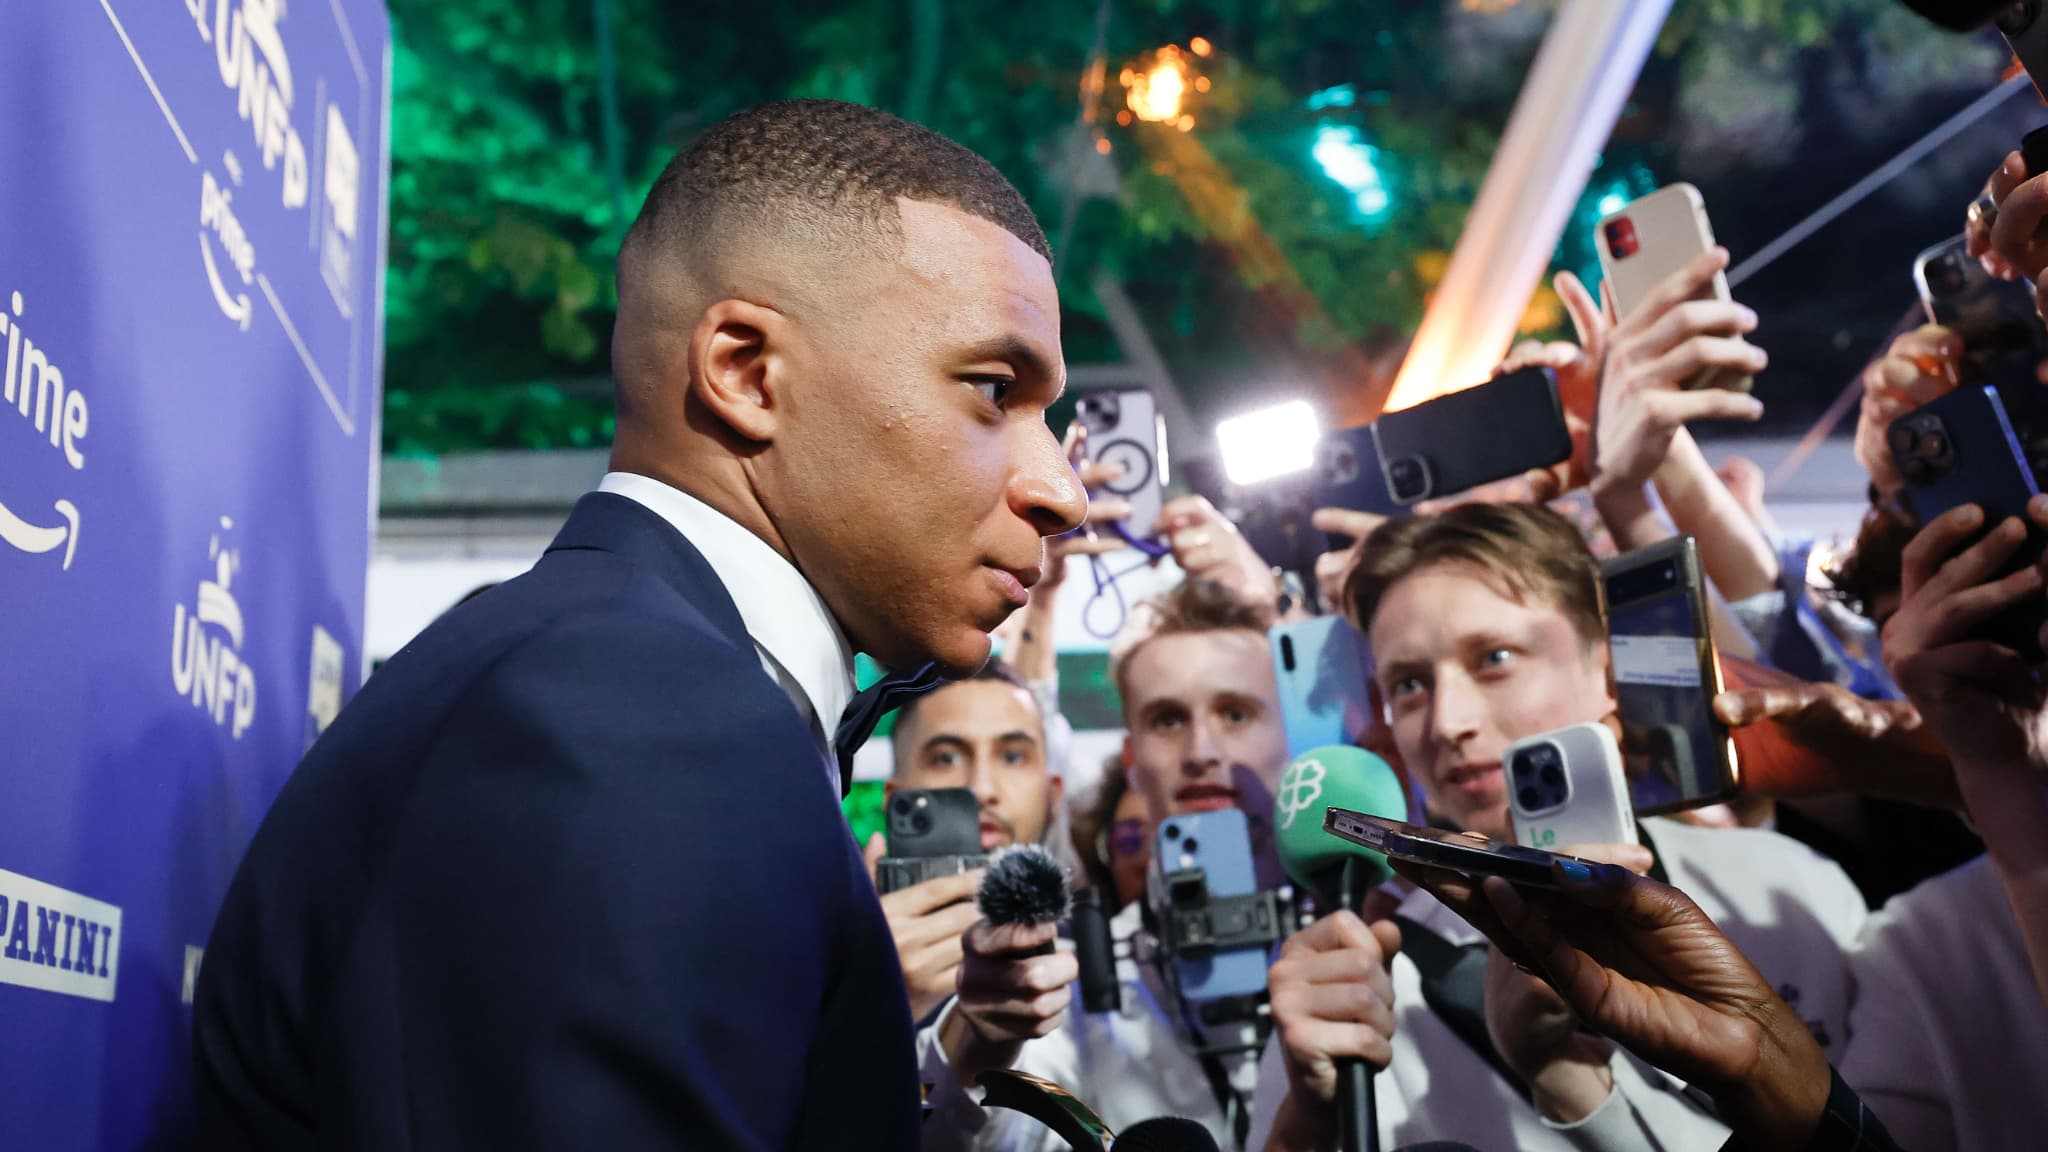 End of season with PSG, arrival at Real Madrid, preparation for Euro 2024… the very busy month ahead for Mbappé